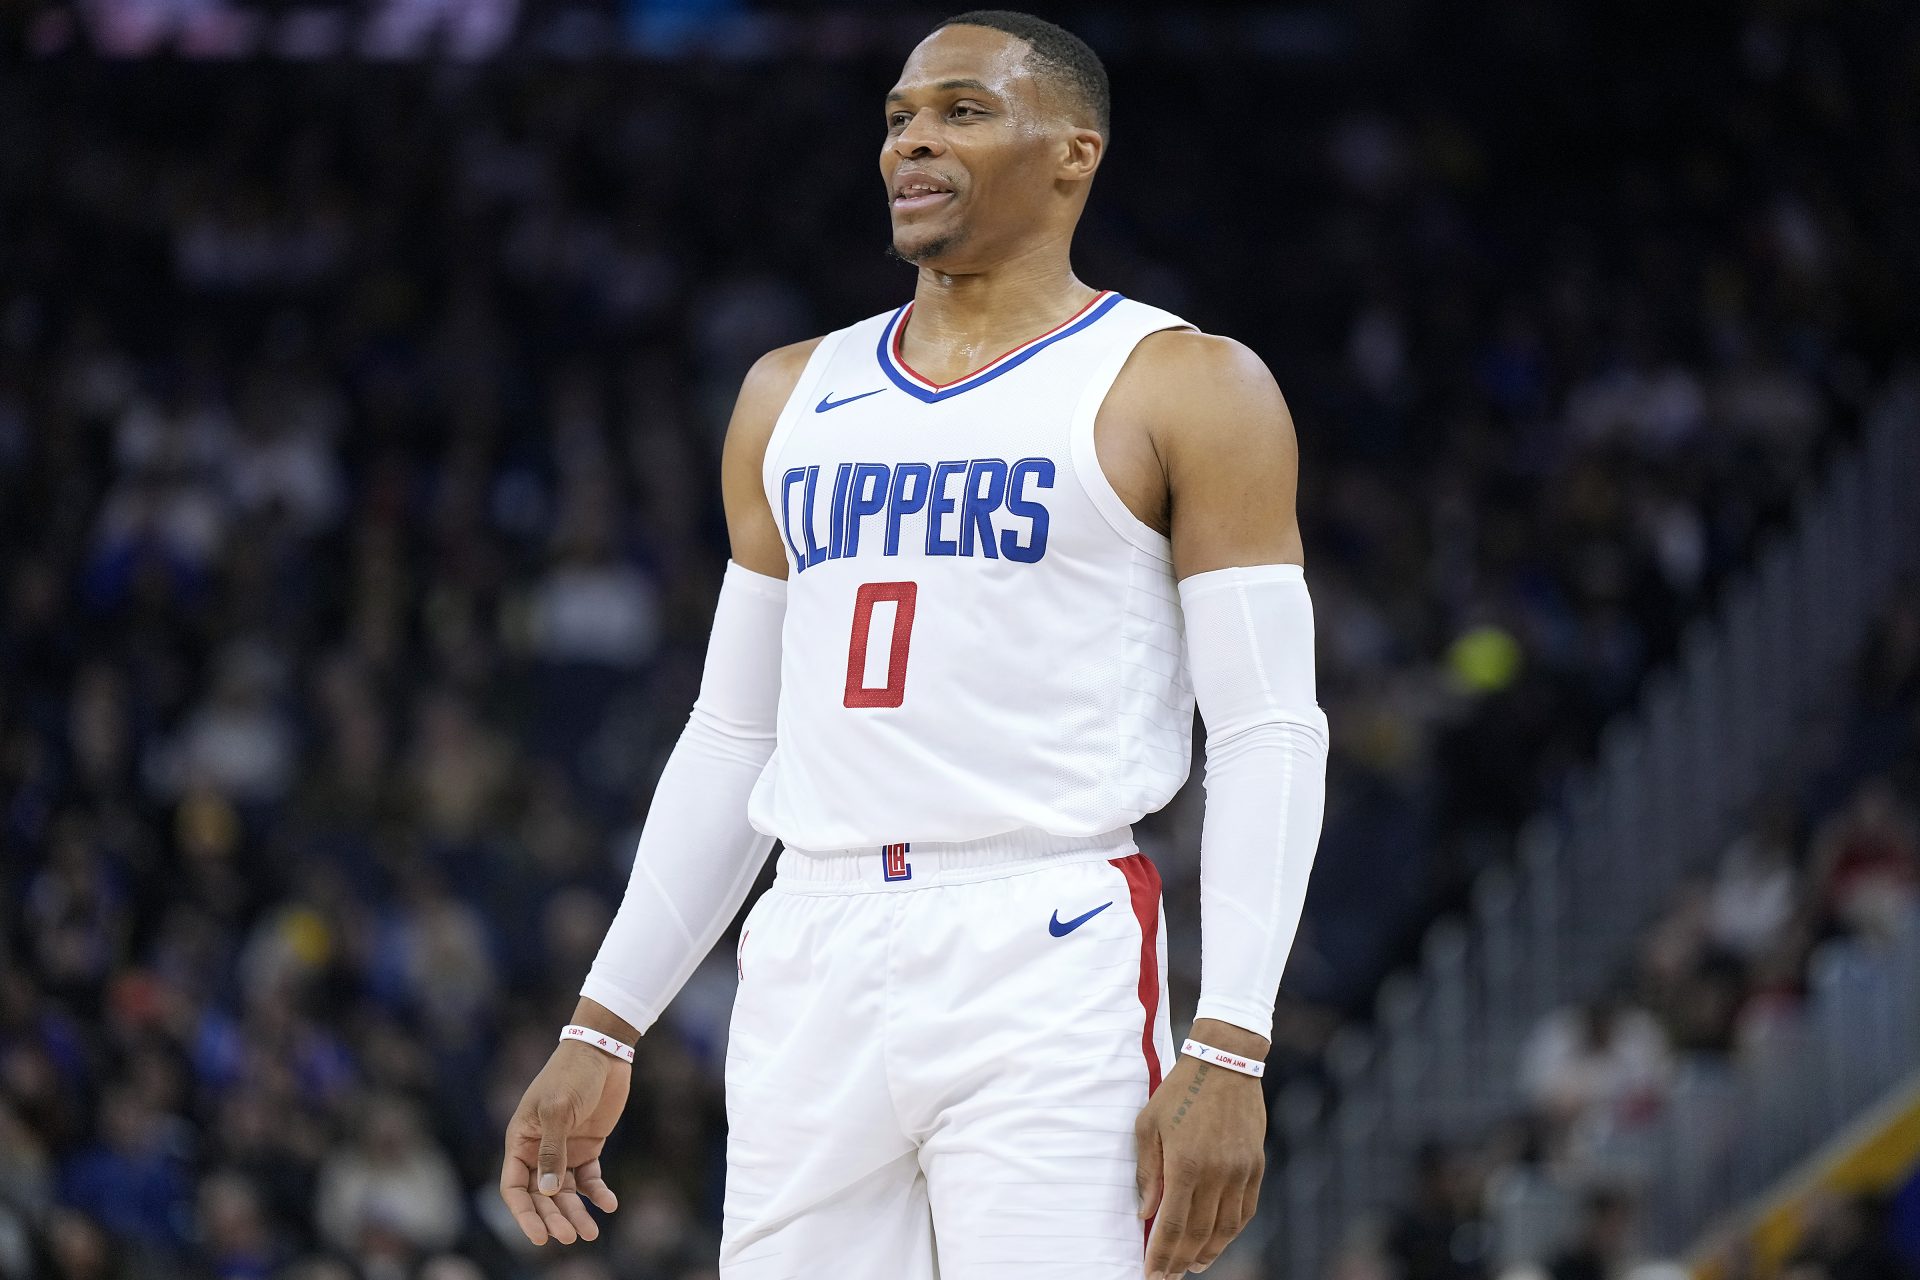 Bench edge: Clippers